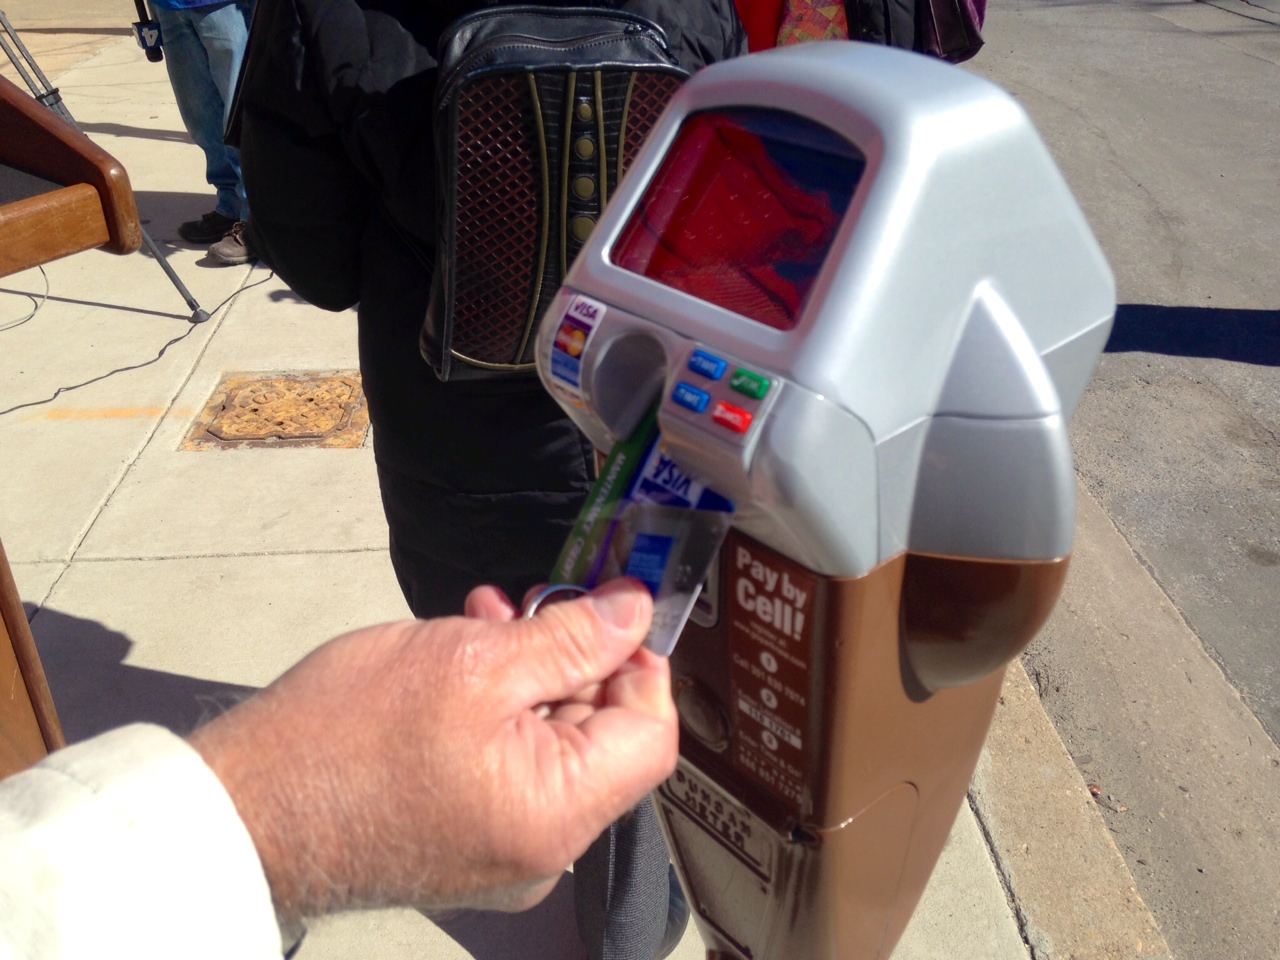 Bethesda to install credit card parking meters